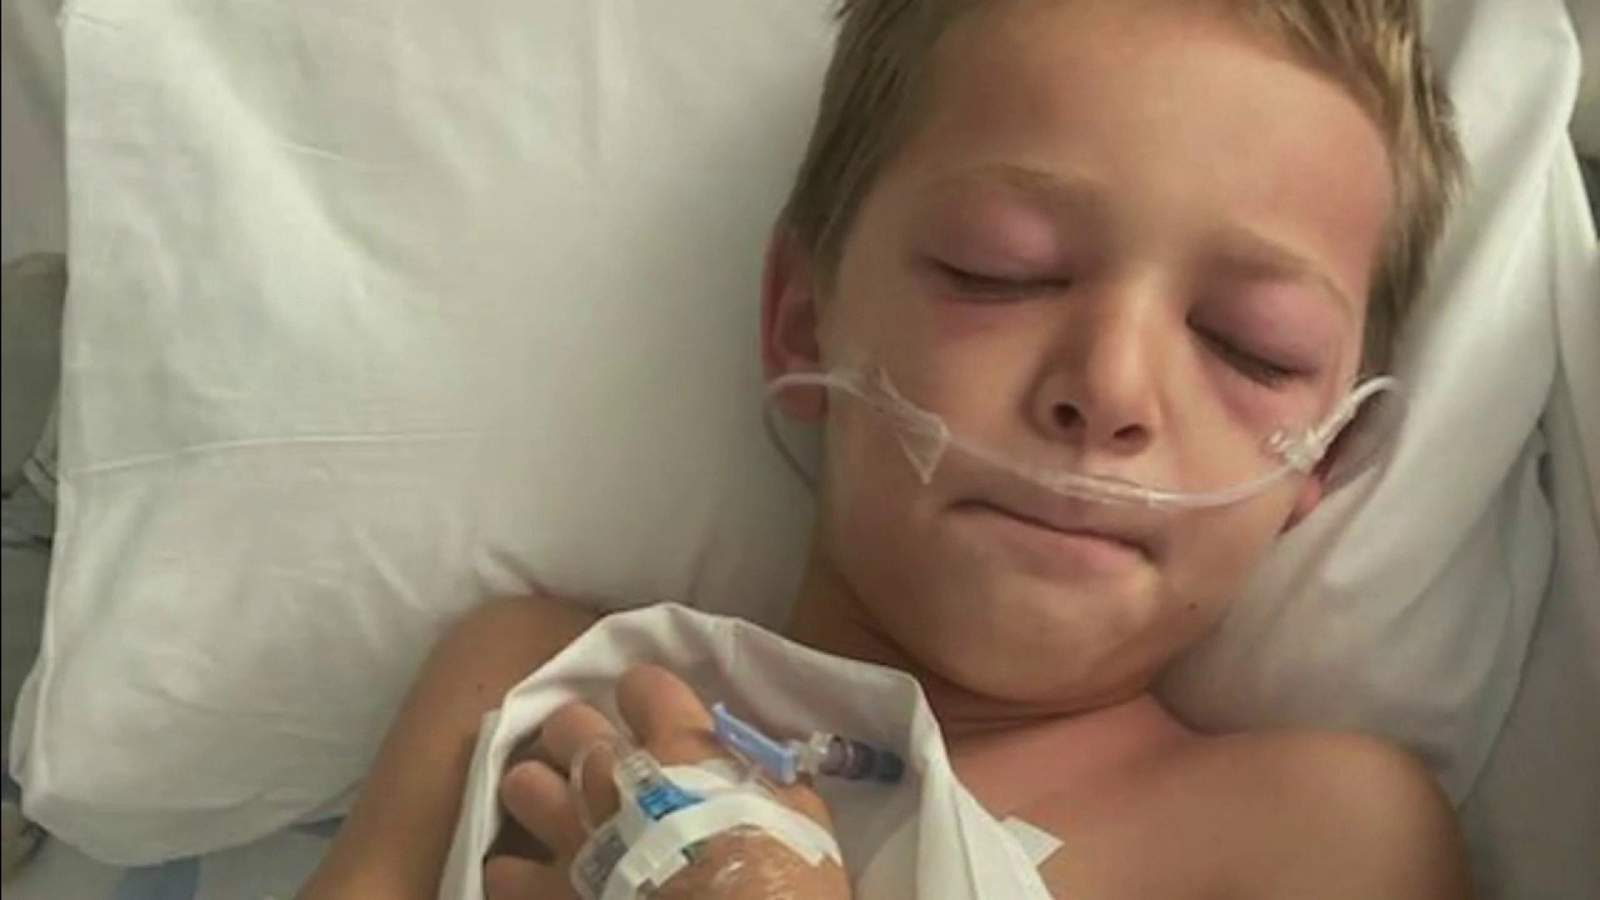 8-year-old Florida Keys boy hospitalized with illness caused by COVID